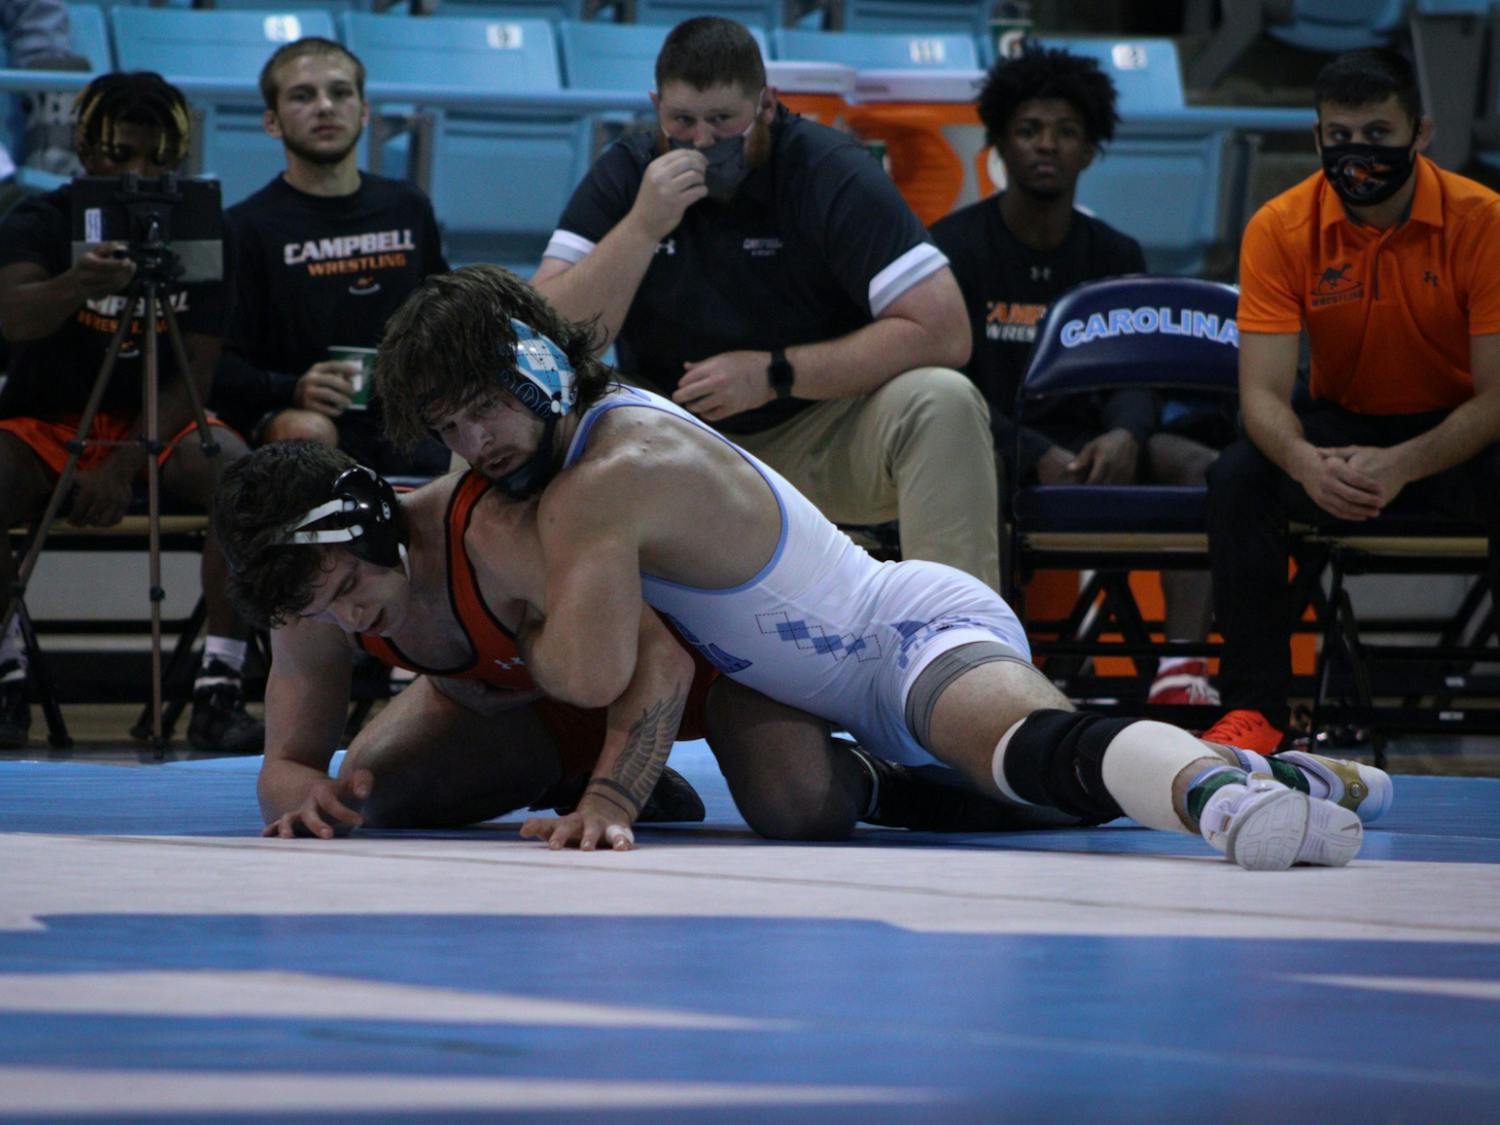 No. 2 redshirt senior Austin O'Connor, defending national champion, pins his opponent to win a match against a Campbell University opponent on Sunday, Nov. 21, 2021. UNC wrestling beat Campbell 24-12.